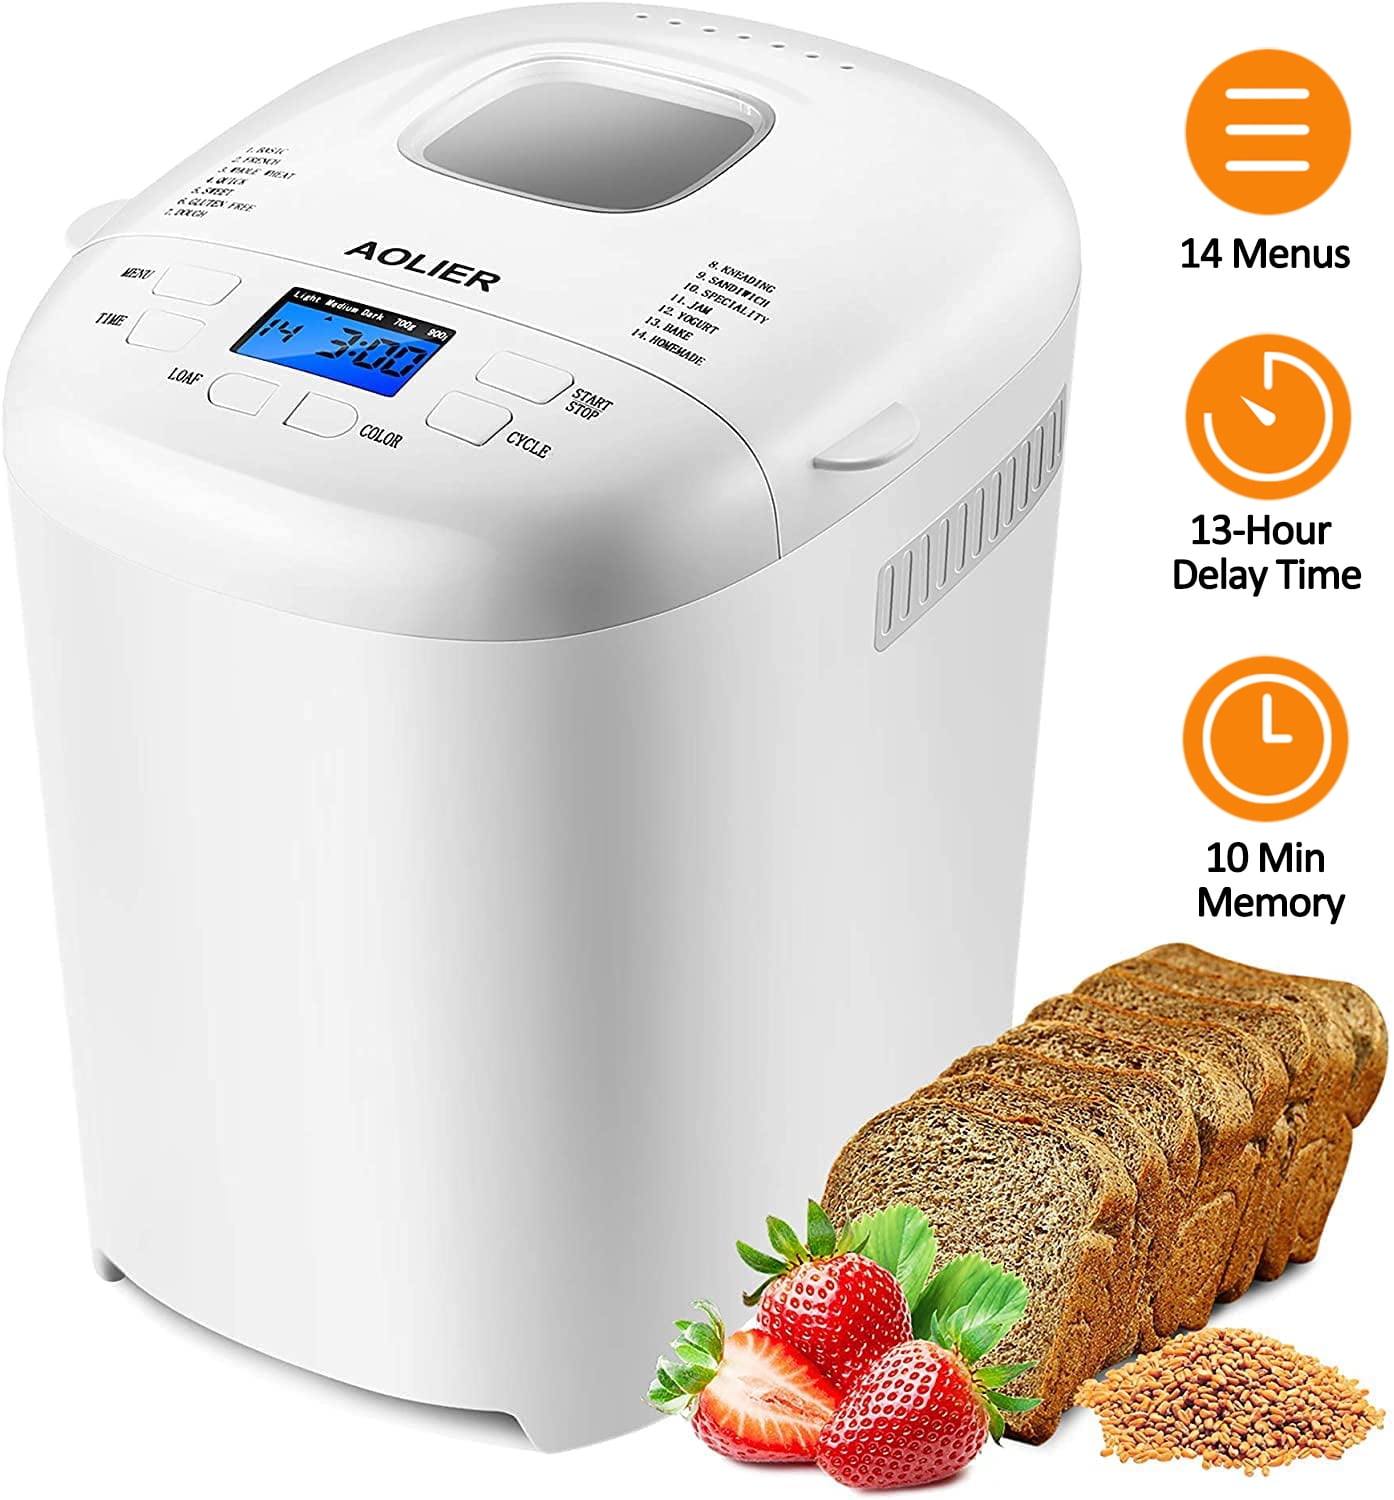 Details about   Automatic Bread Maker Machine 17-in-1 Keep Warm Nonstick Pan 14 Settings 2 LB 